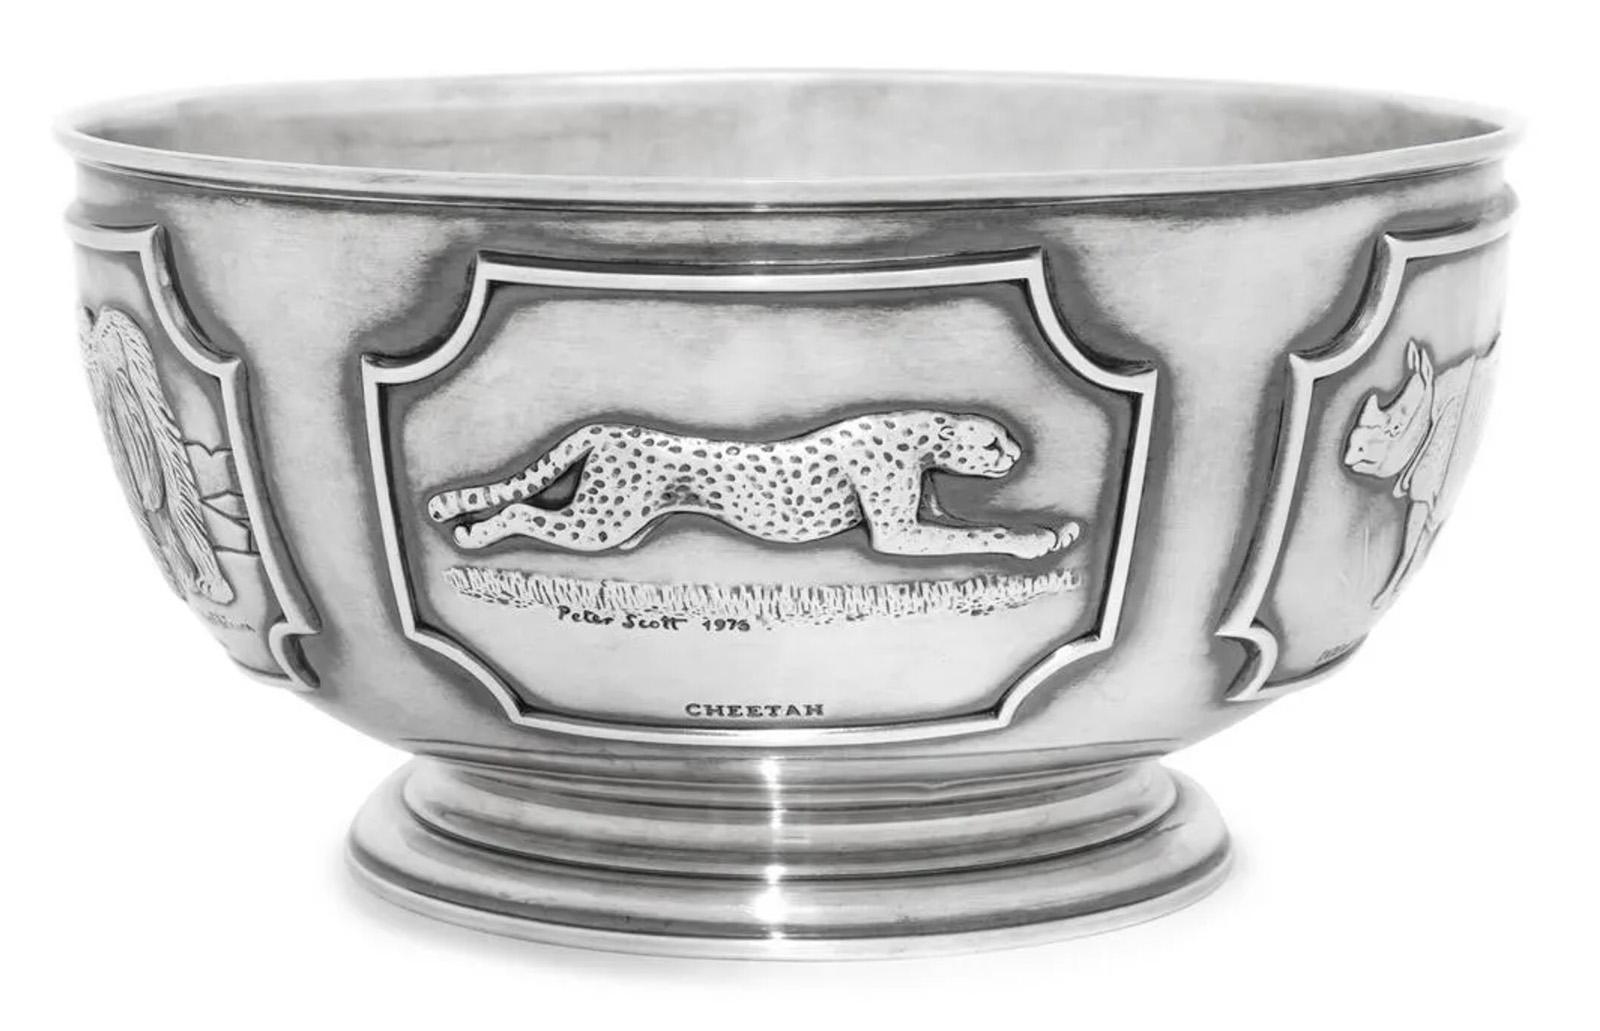 An English silver limited edition center bowl from Tessier Ltd., London with relief panels of various endangered species, including the Polar Bear by Robert Bateman, Cheetah by Peter Scott, Arabian Oryx by Keith Shackleton, and Tiger by Raymond